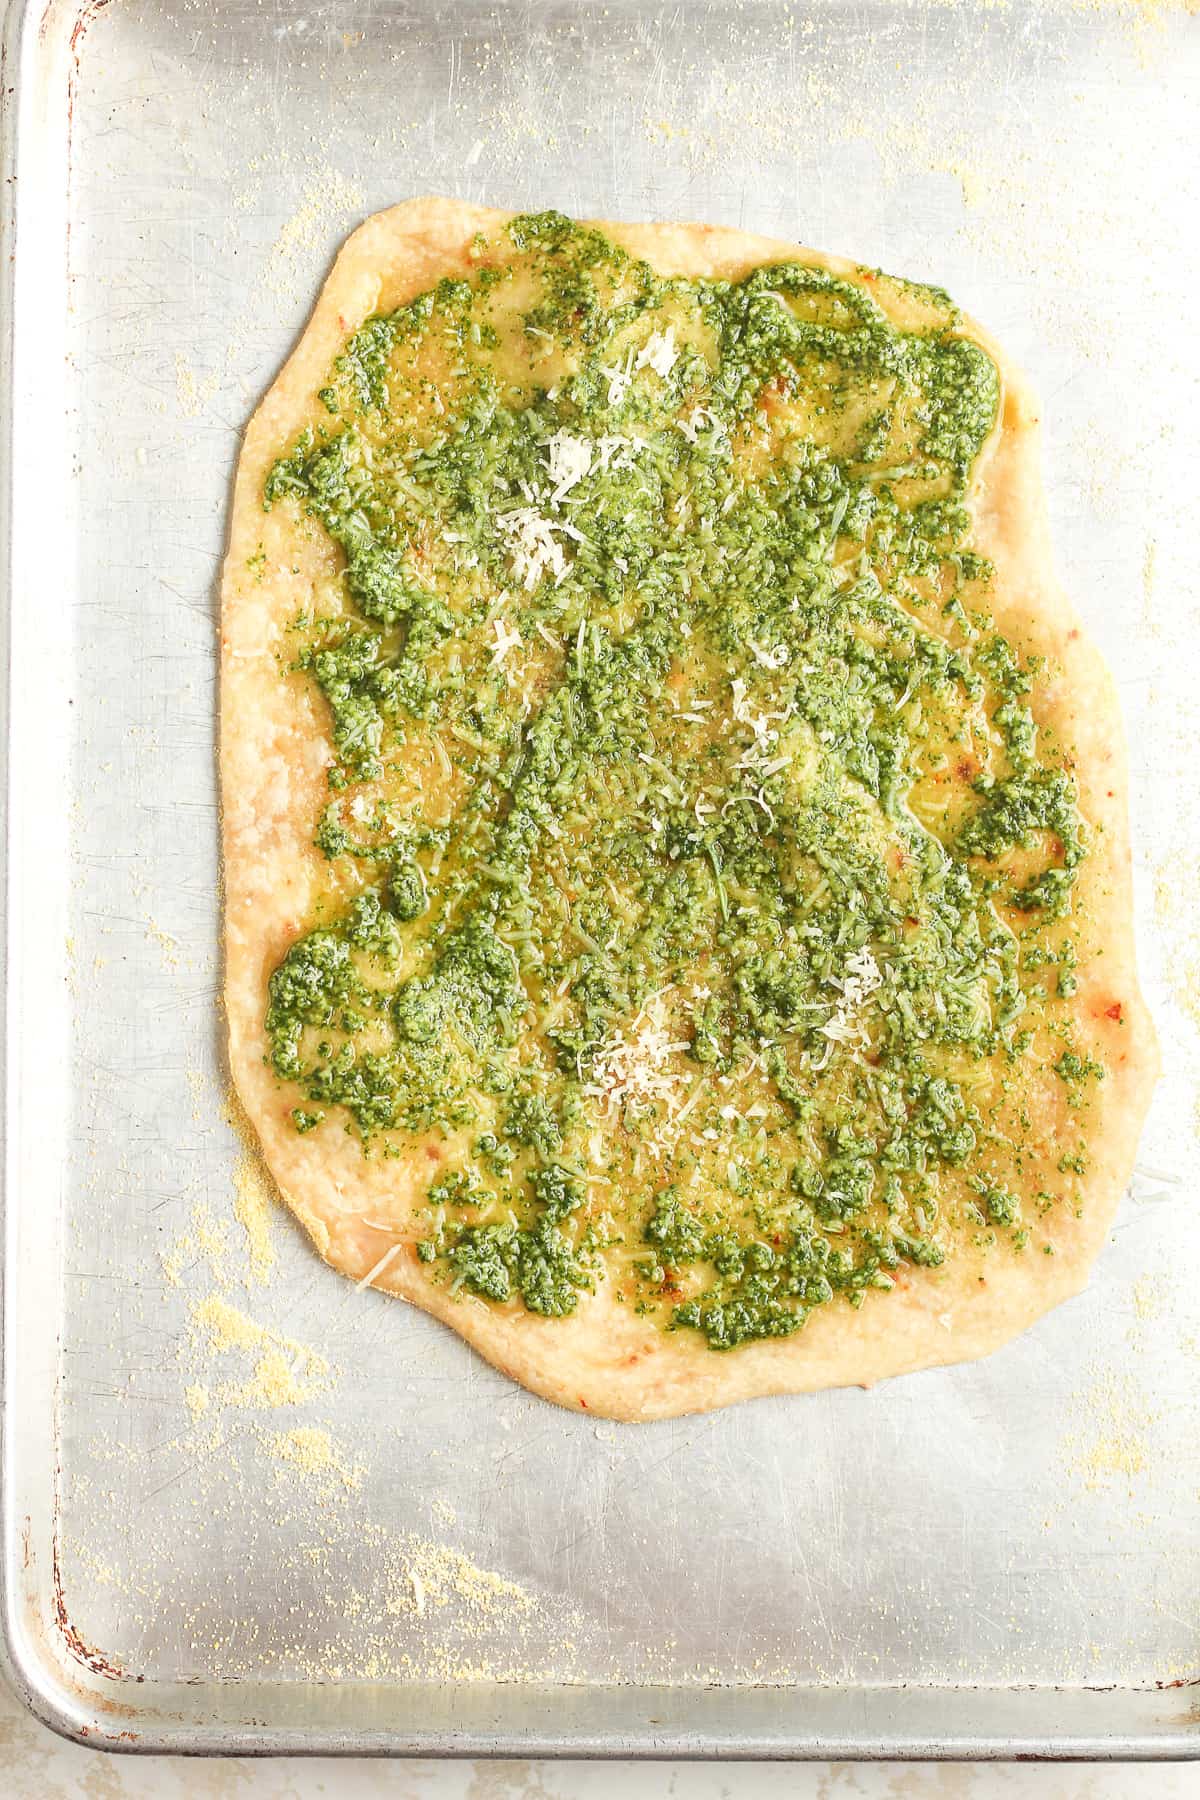 The pre-baked flatbread with the pesto on top.